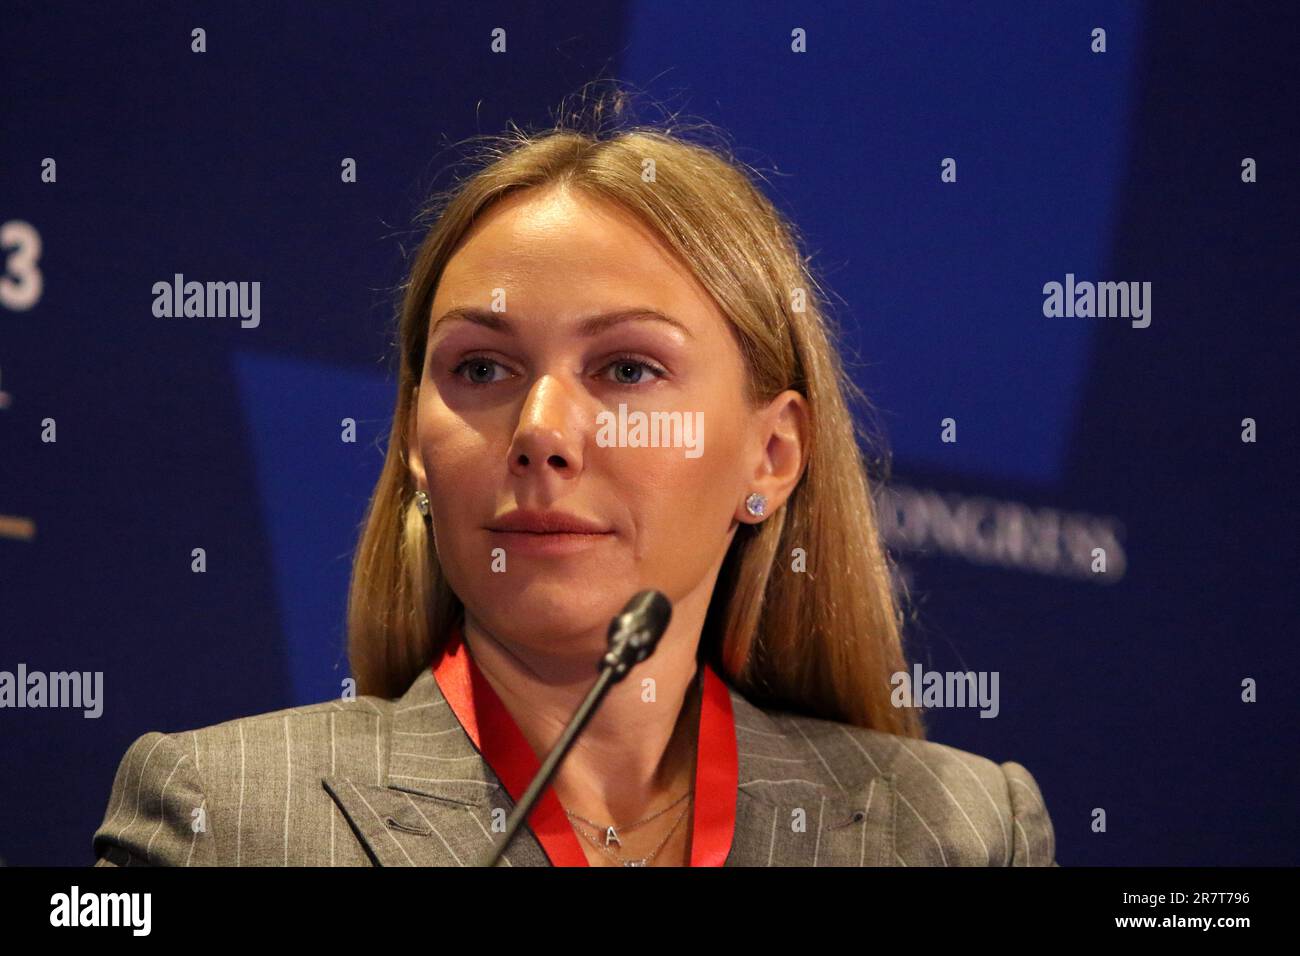 Saint Petersburg, Russia. 16th June, 2023. Anastasia Mikhailova, Director of the communications Directorate, Cherkizovo Group, attends a session on Healthy Eating - Healthy Development in the framework of the St. Petersburg International Economic Forum 2023 (SPIEF 2023). Credit: SOPA Images Limited/Alamy Live News Stock Photo